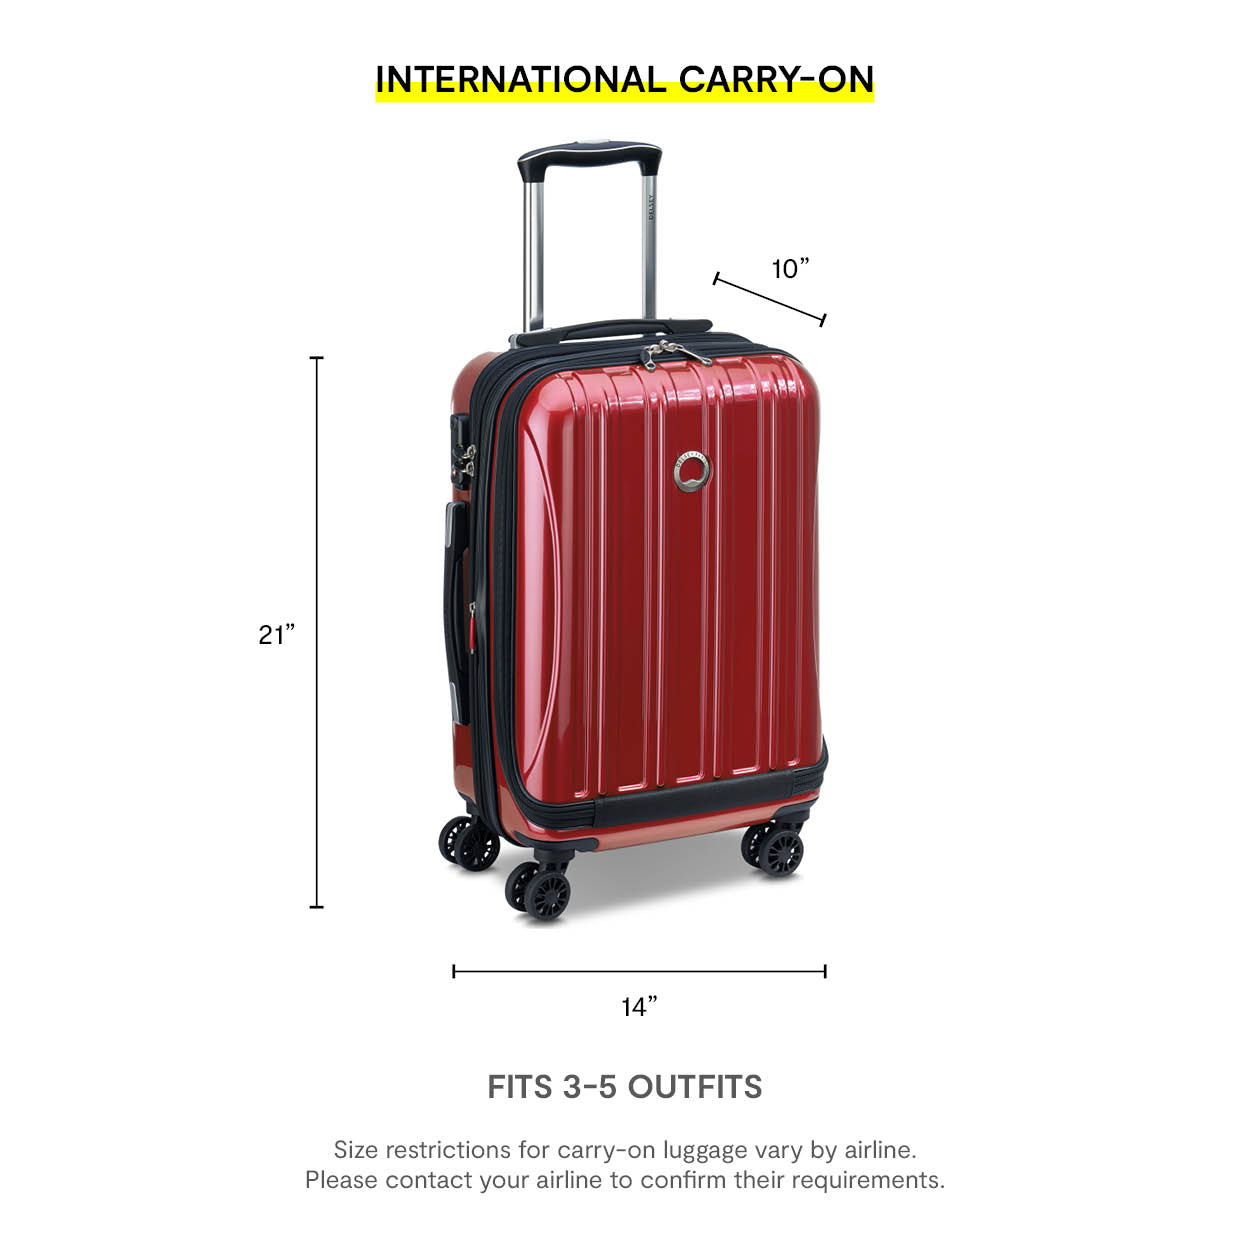 DELSEY PARIS Helium Aero 19" Hardside Expandable Spinner Carry-On Luggage, Red - image 3 of 8